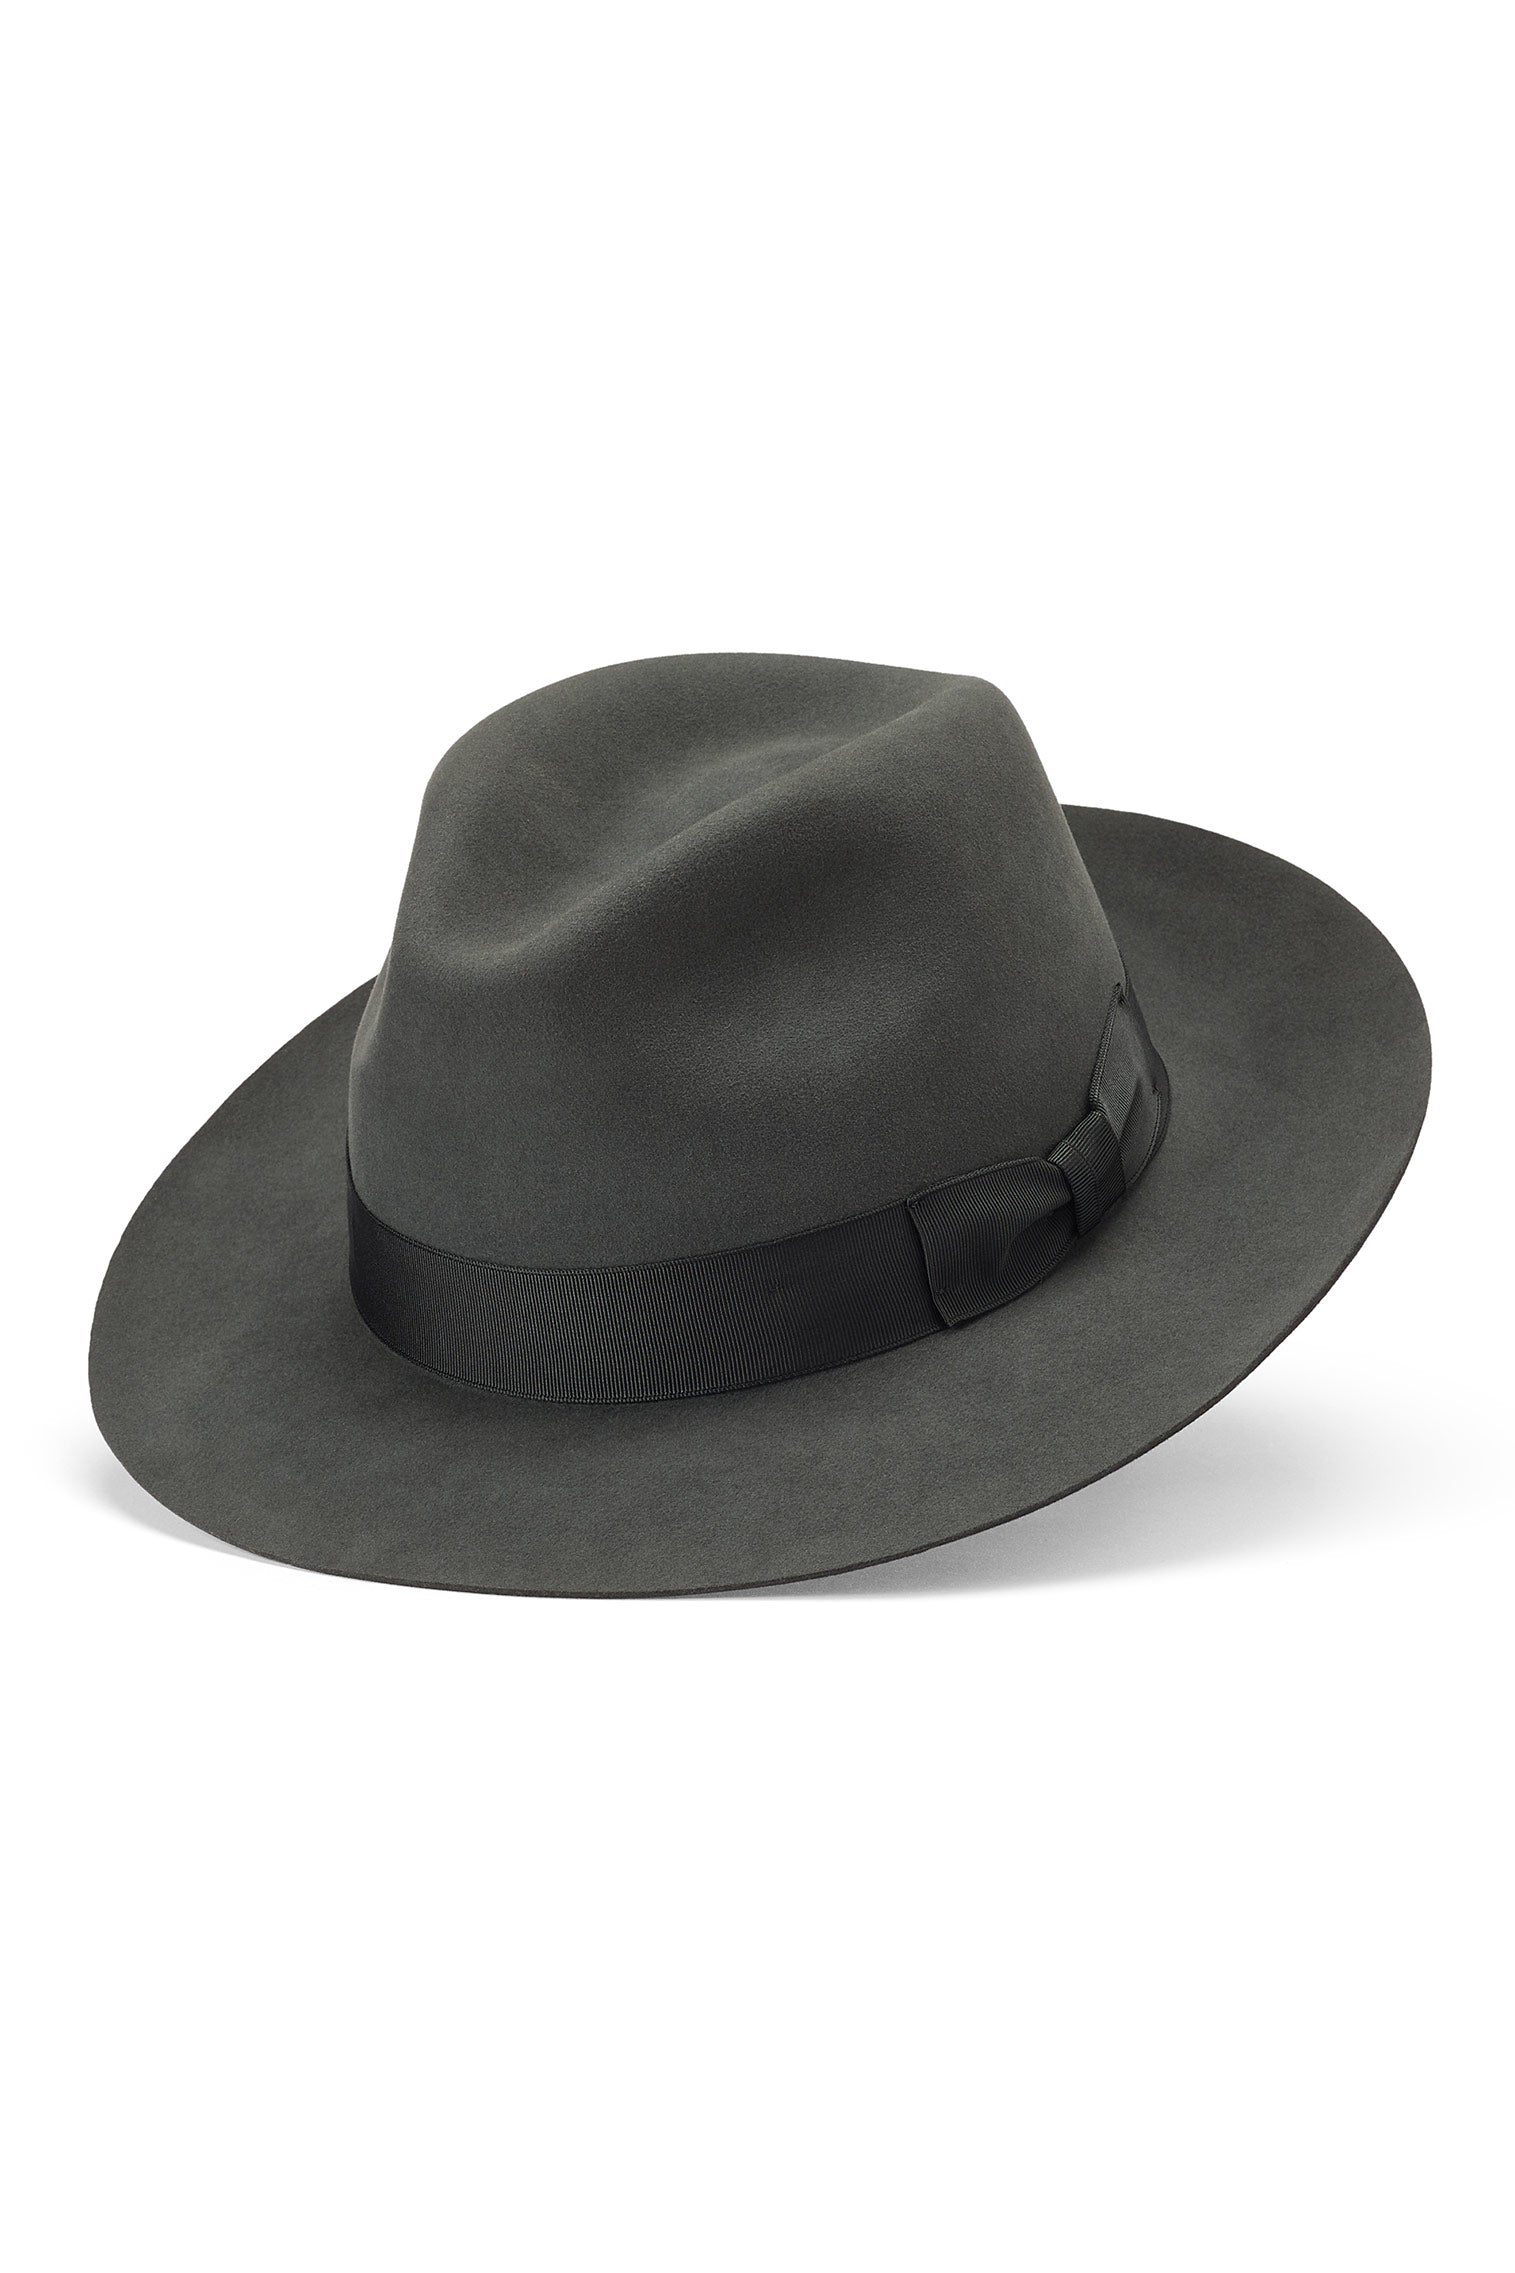 Sloane Fedora - Father's Day Gift Guide - Lock & Co. Hatters London UK